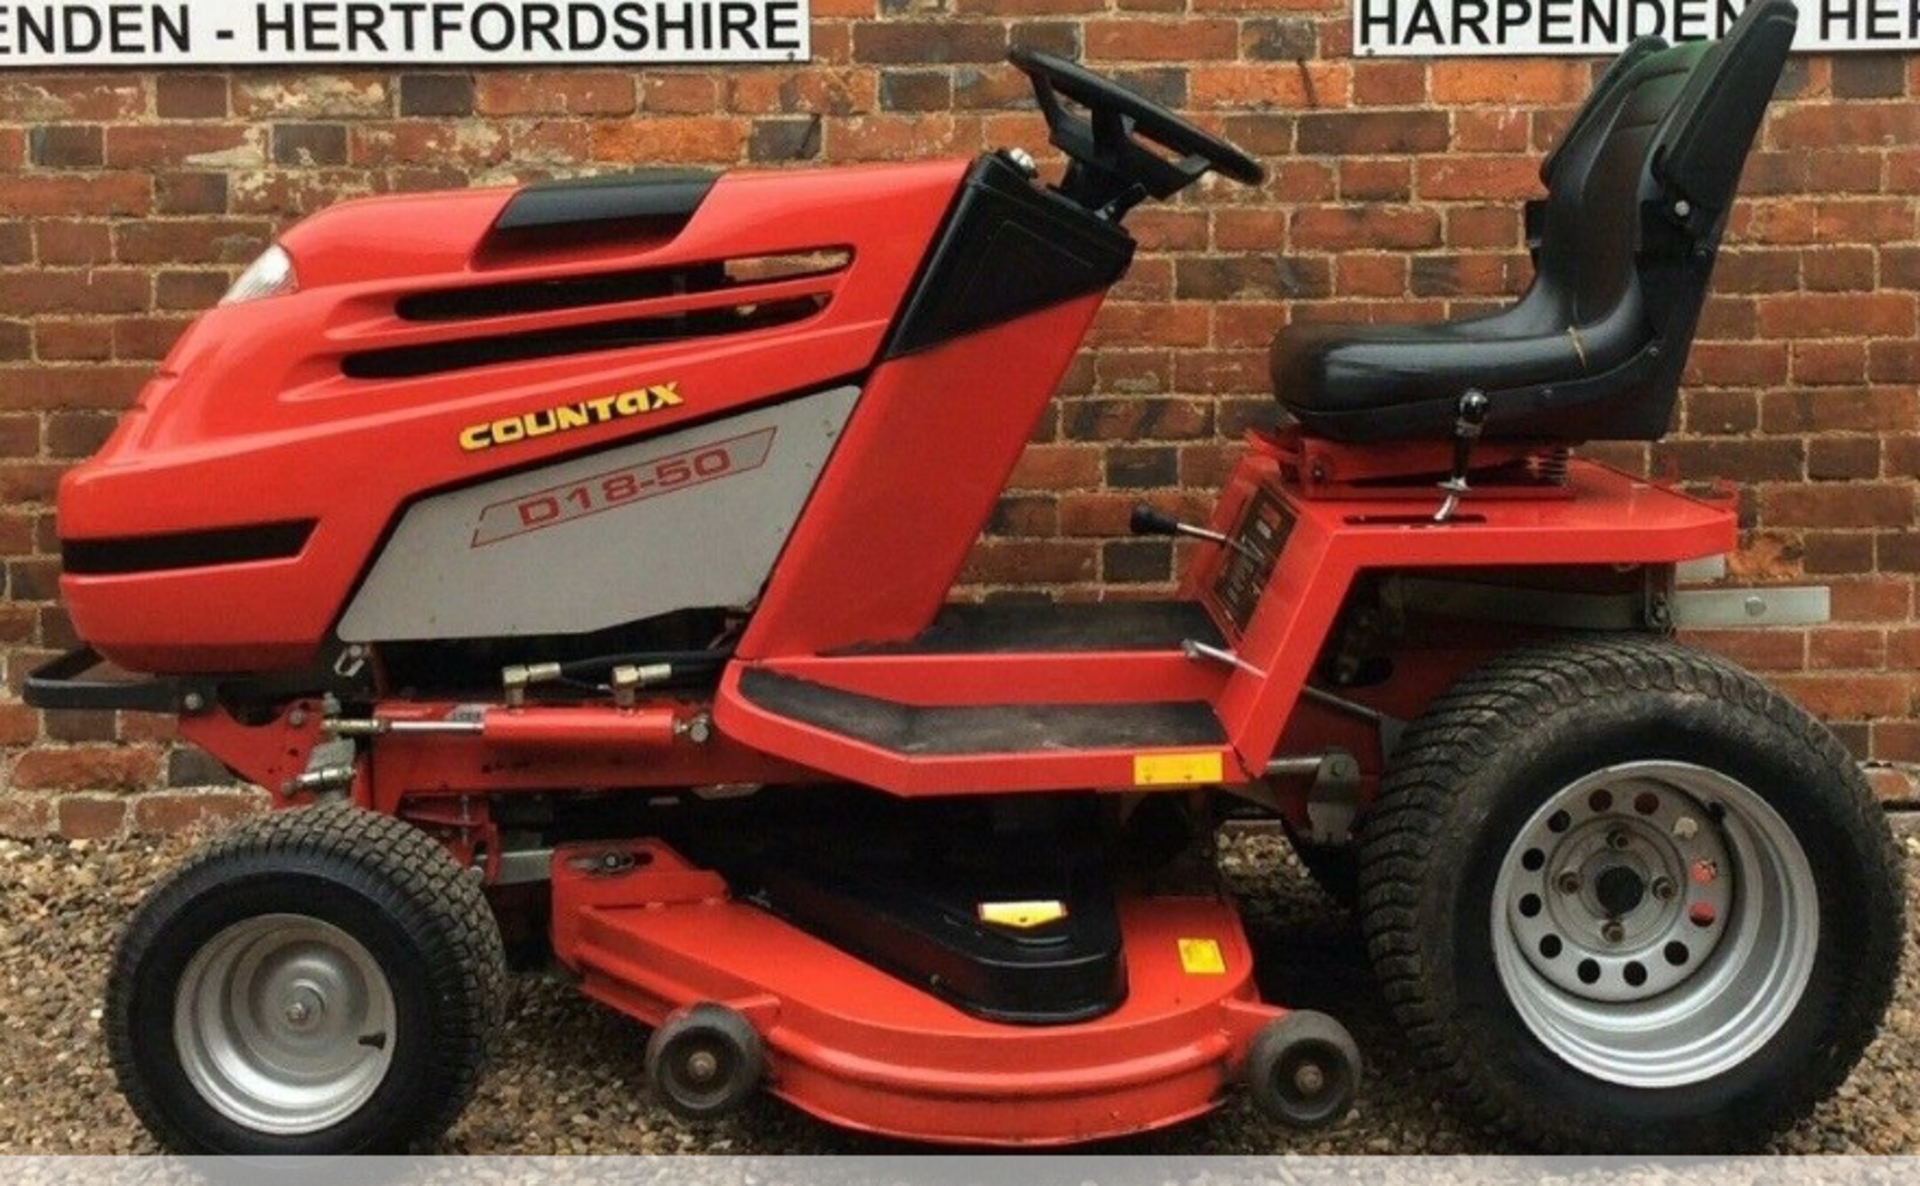 Countax D 18-50 Ride On Mower - Image 2 of 8